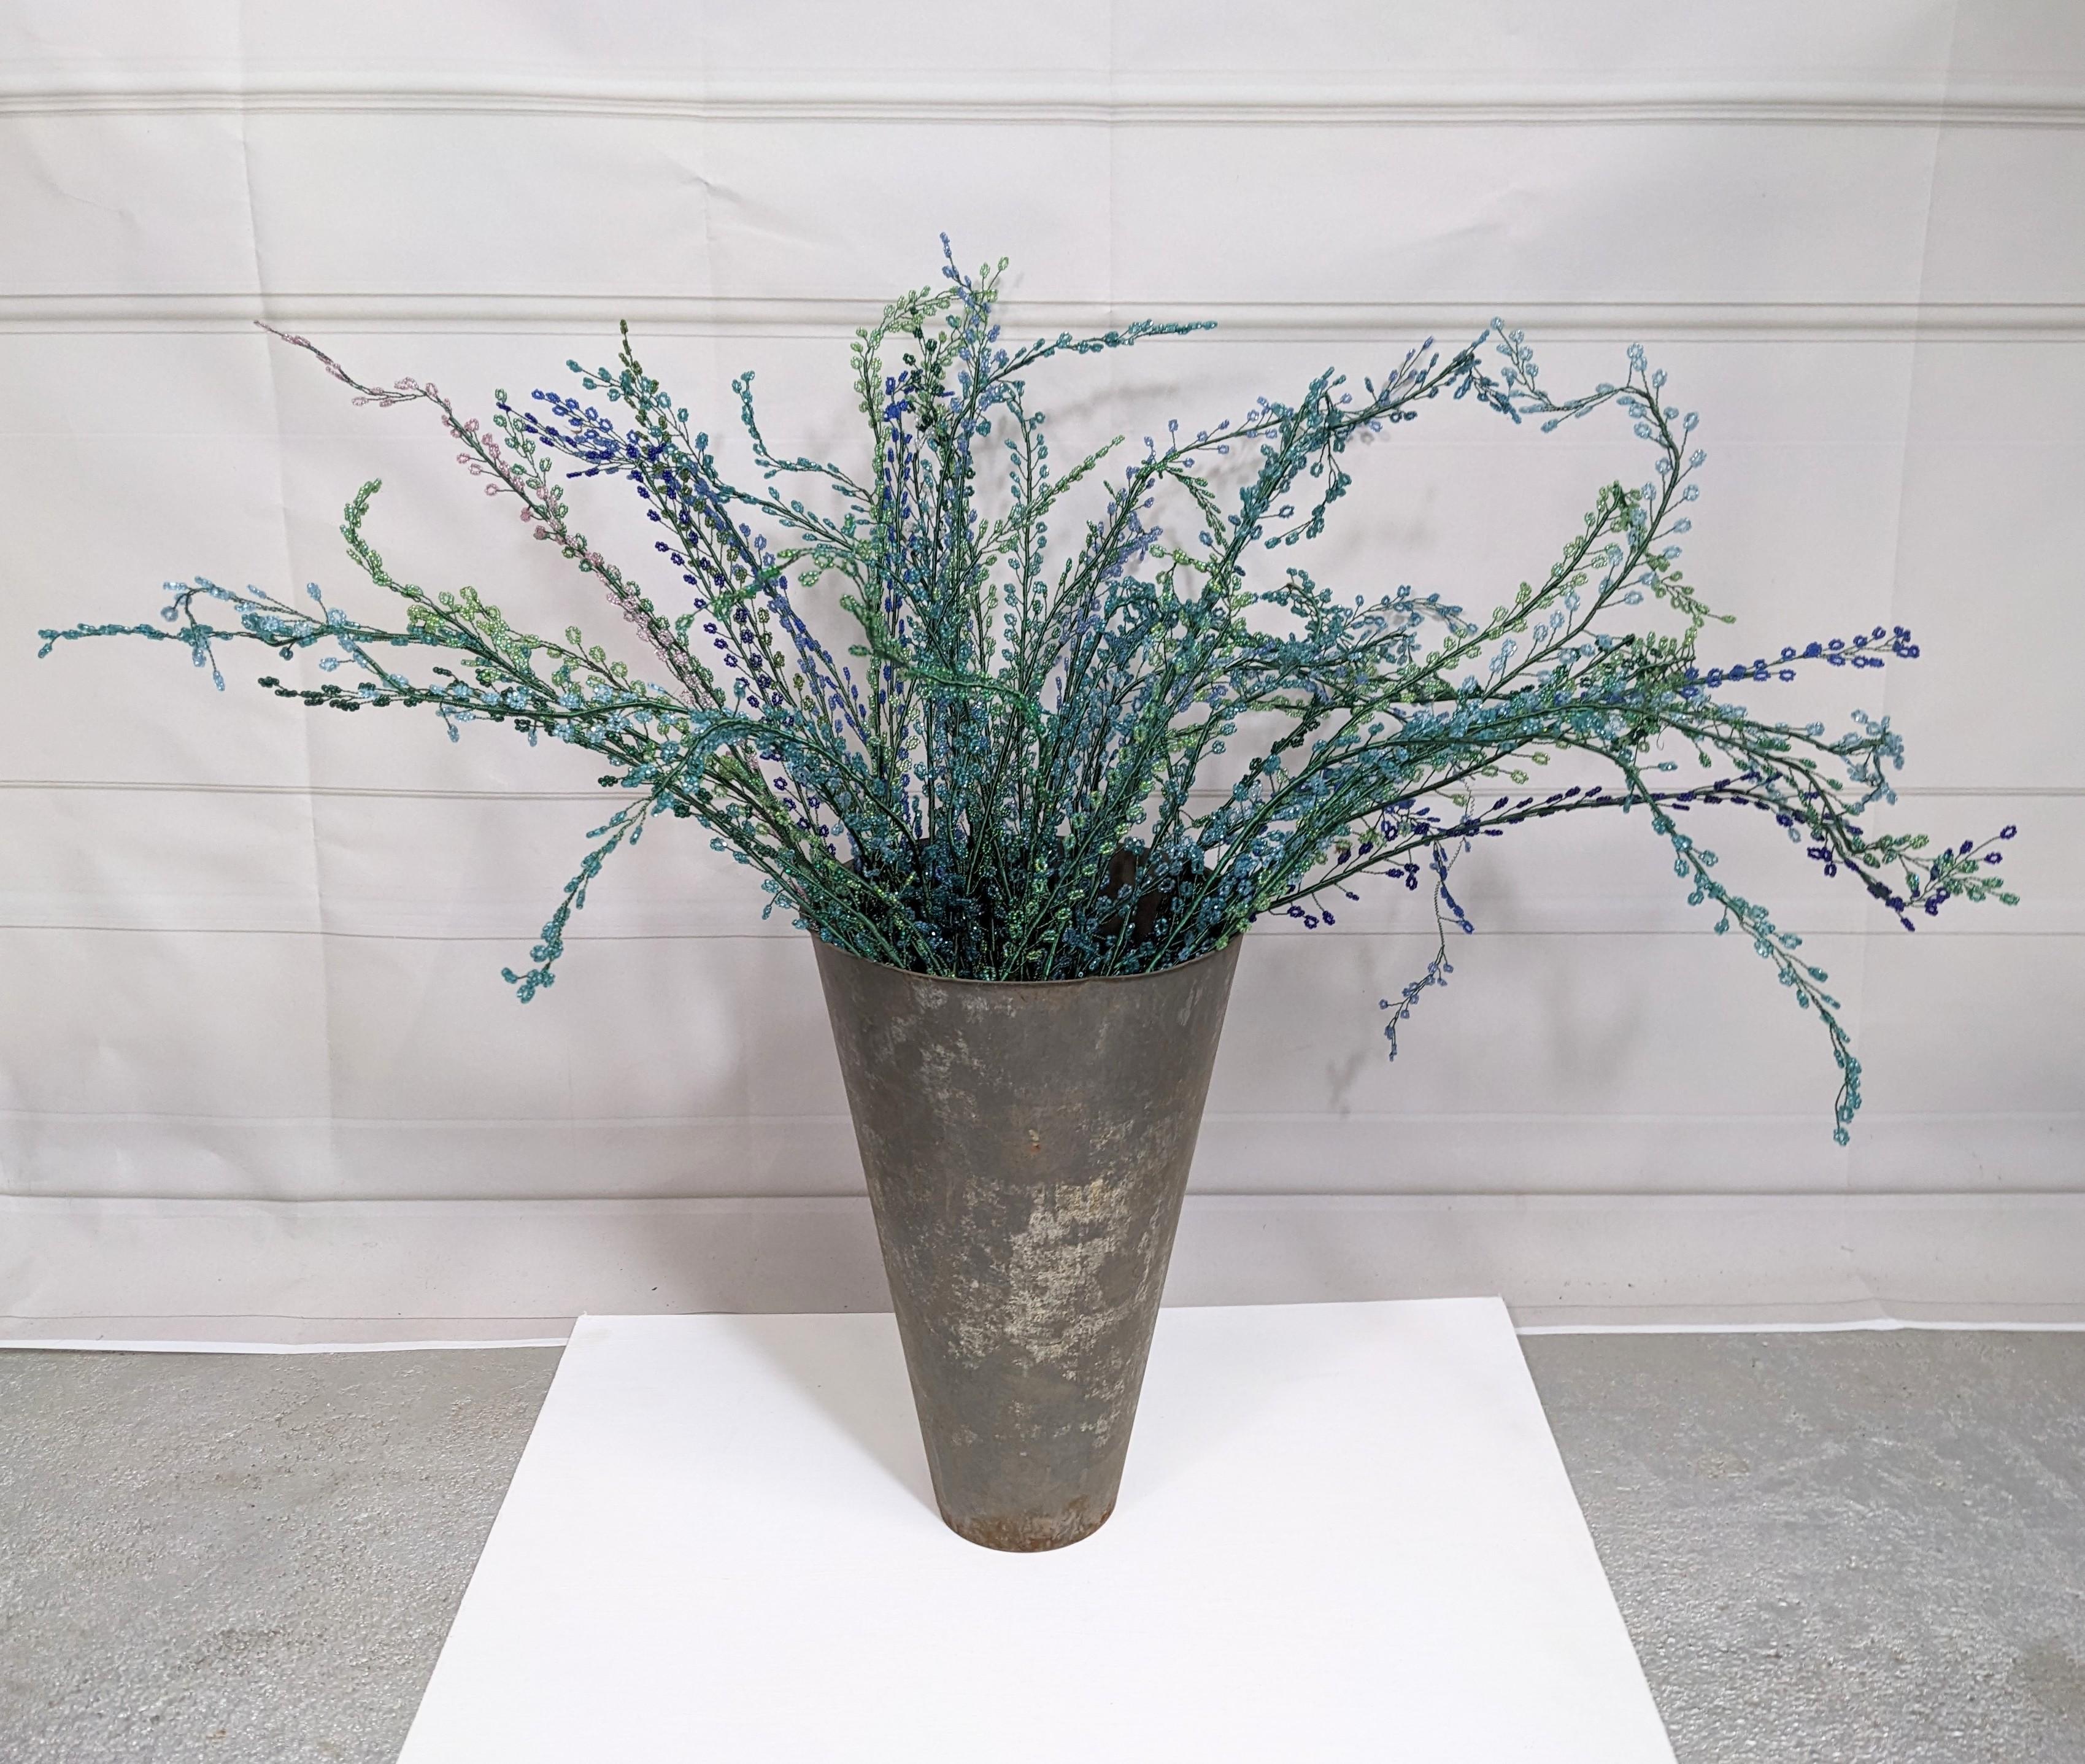 Bouquet of French Hand Beaded Ferns from the 1960's. Dozens of hand wired and beaded ferns in a variety of greens and blues. On strand is a pale pink. Easy to form into different arrangements. A variety of lengths with the longest at 24